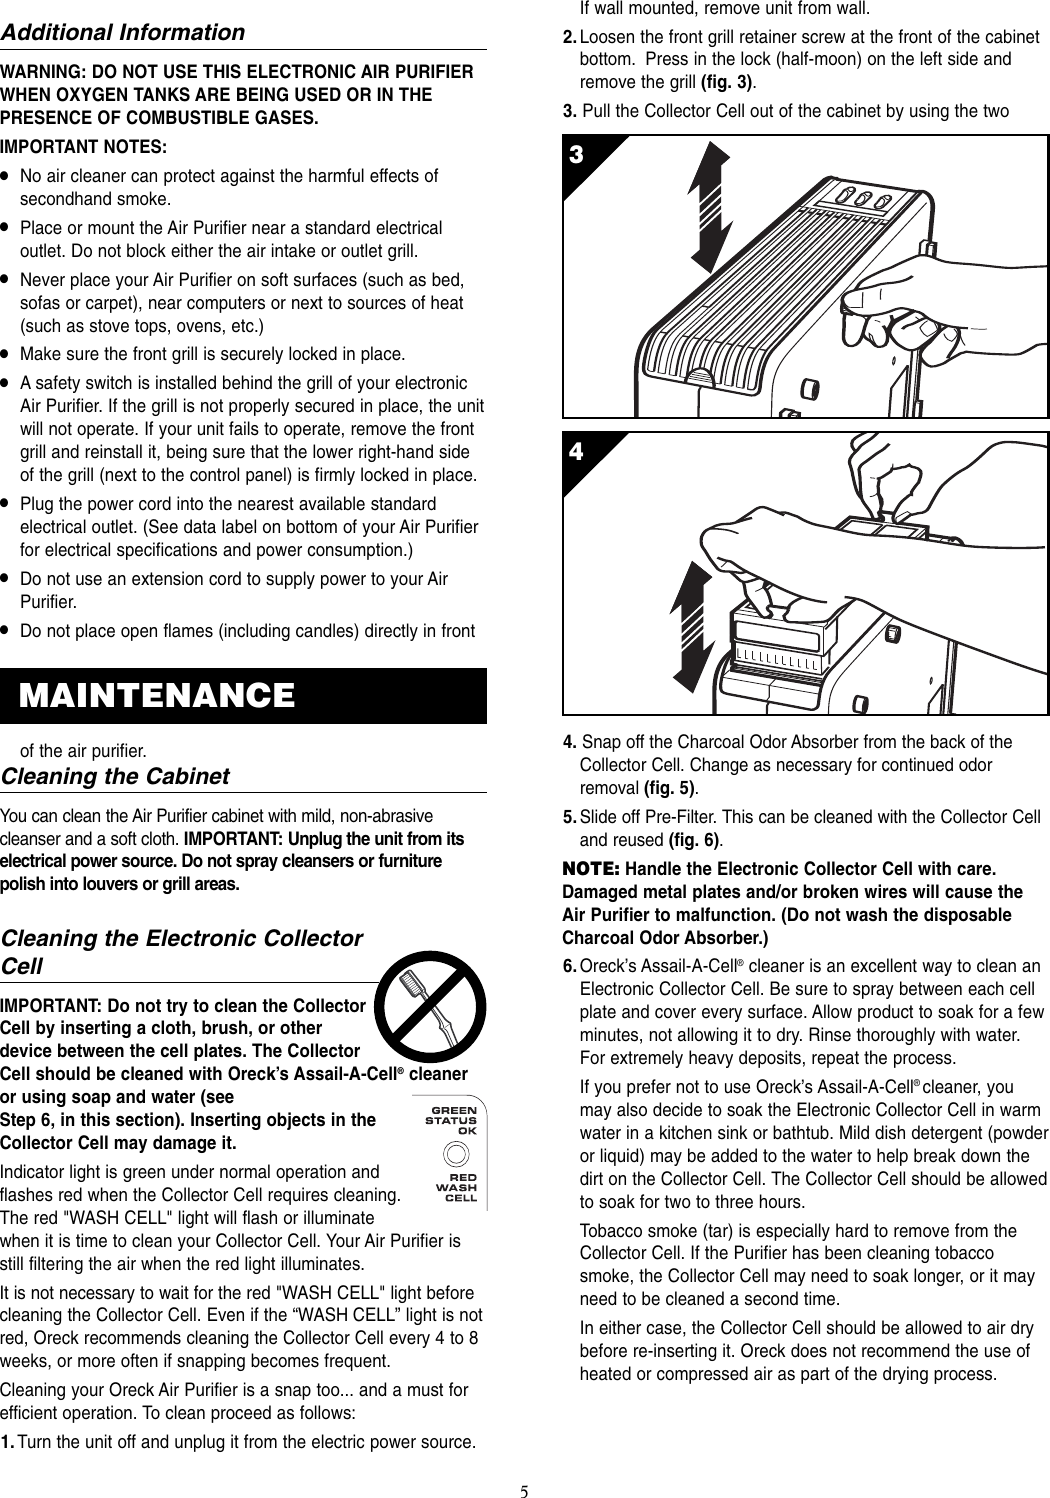 Page 5 of 8 - Oreck Oreck-Air8-Series-Users-Manual- Air 8 Manual Rev B  Oreck-air8-series-users-manual